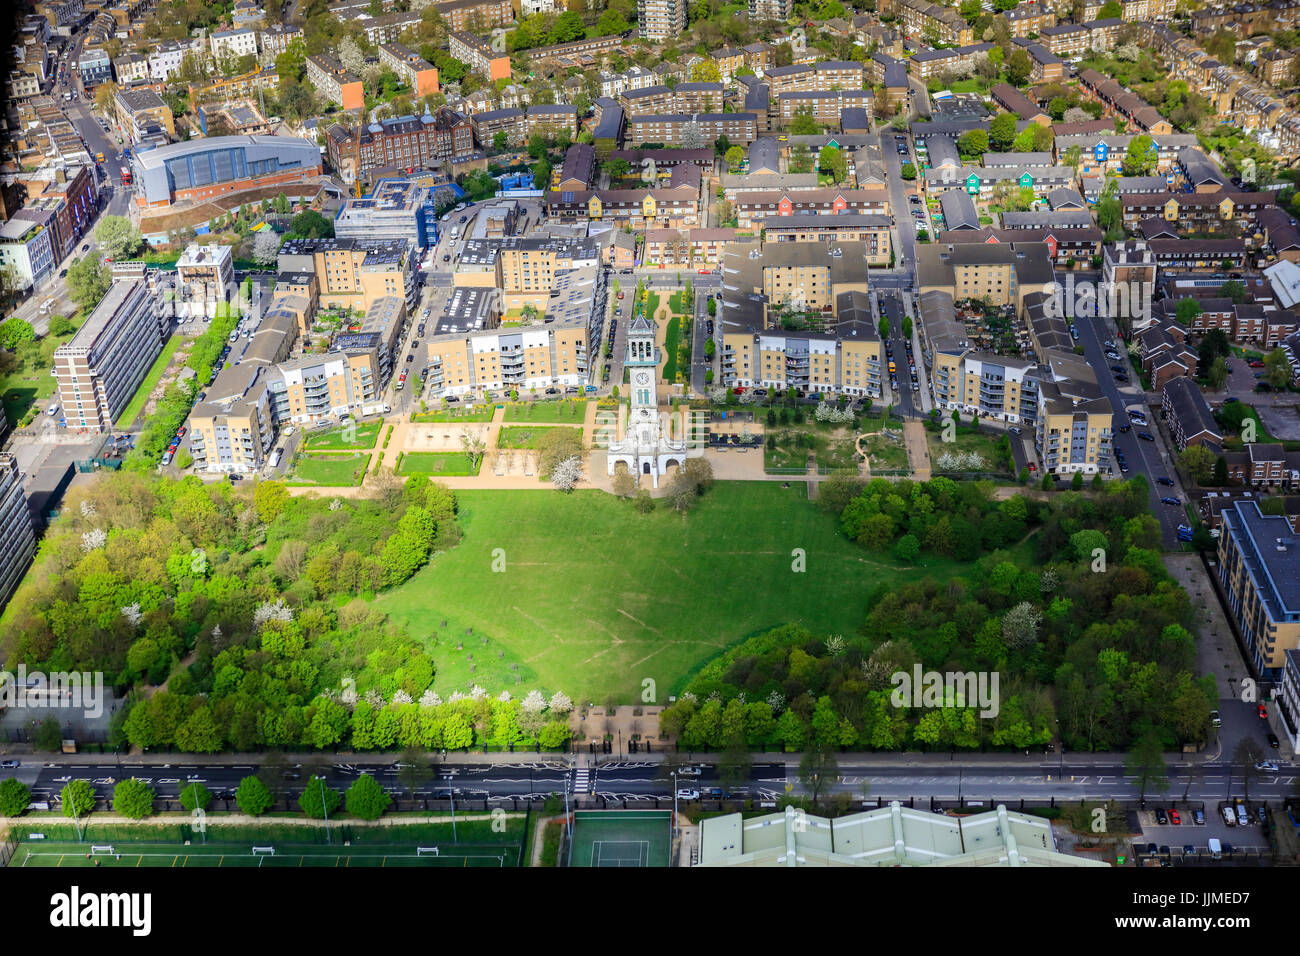 An aerial view of a housing development on the site of the former Metropolitan Cattle Market, North London Stock Photo